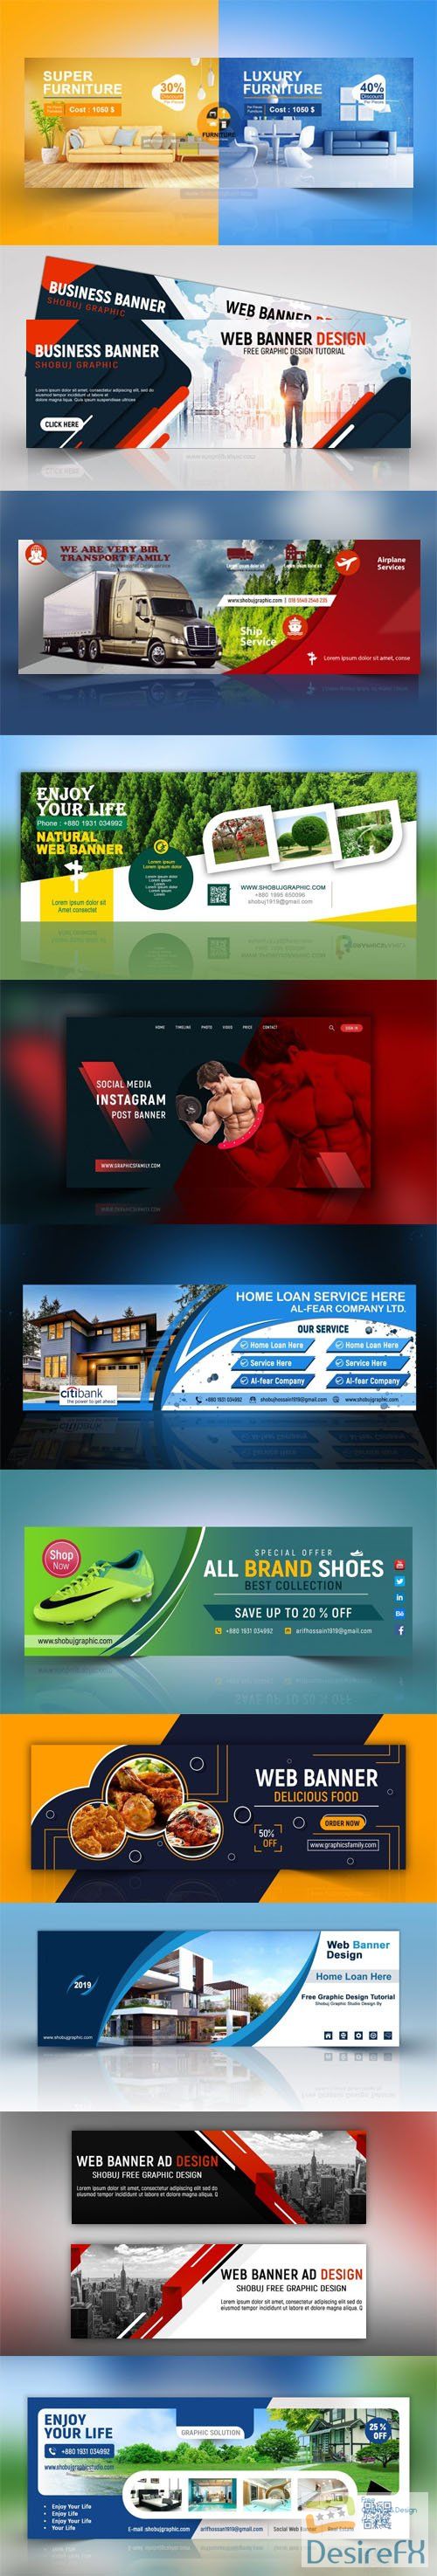 11 Multipurpose Web Banners PSD Templates Collection